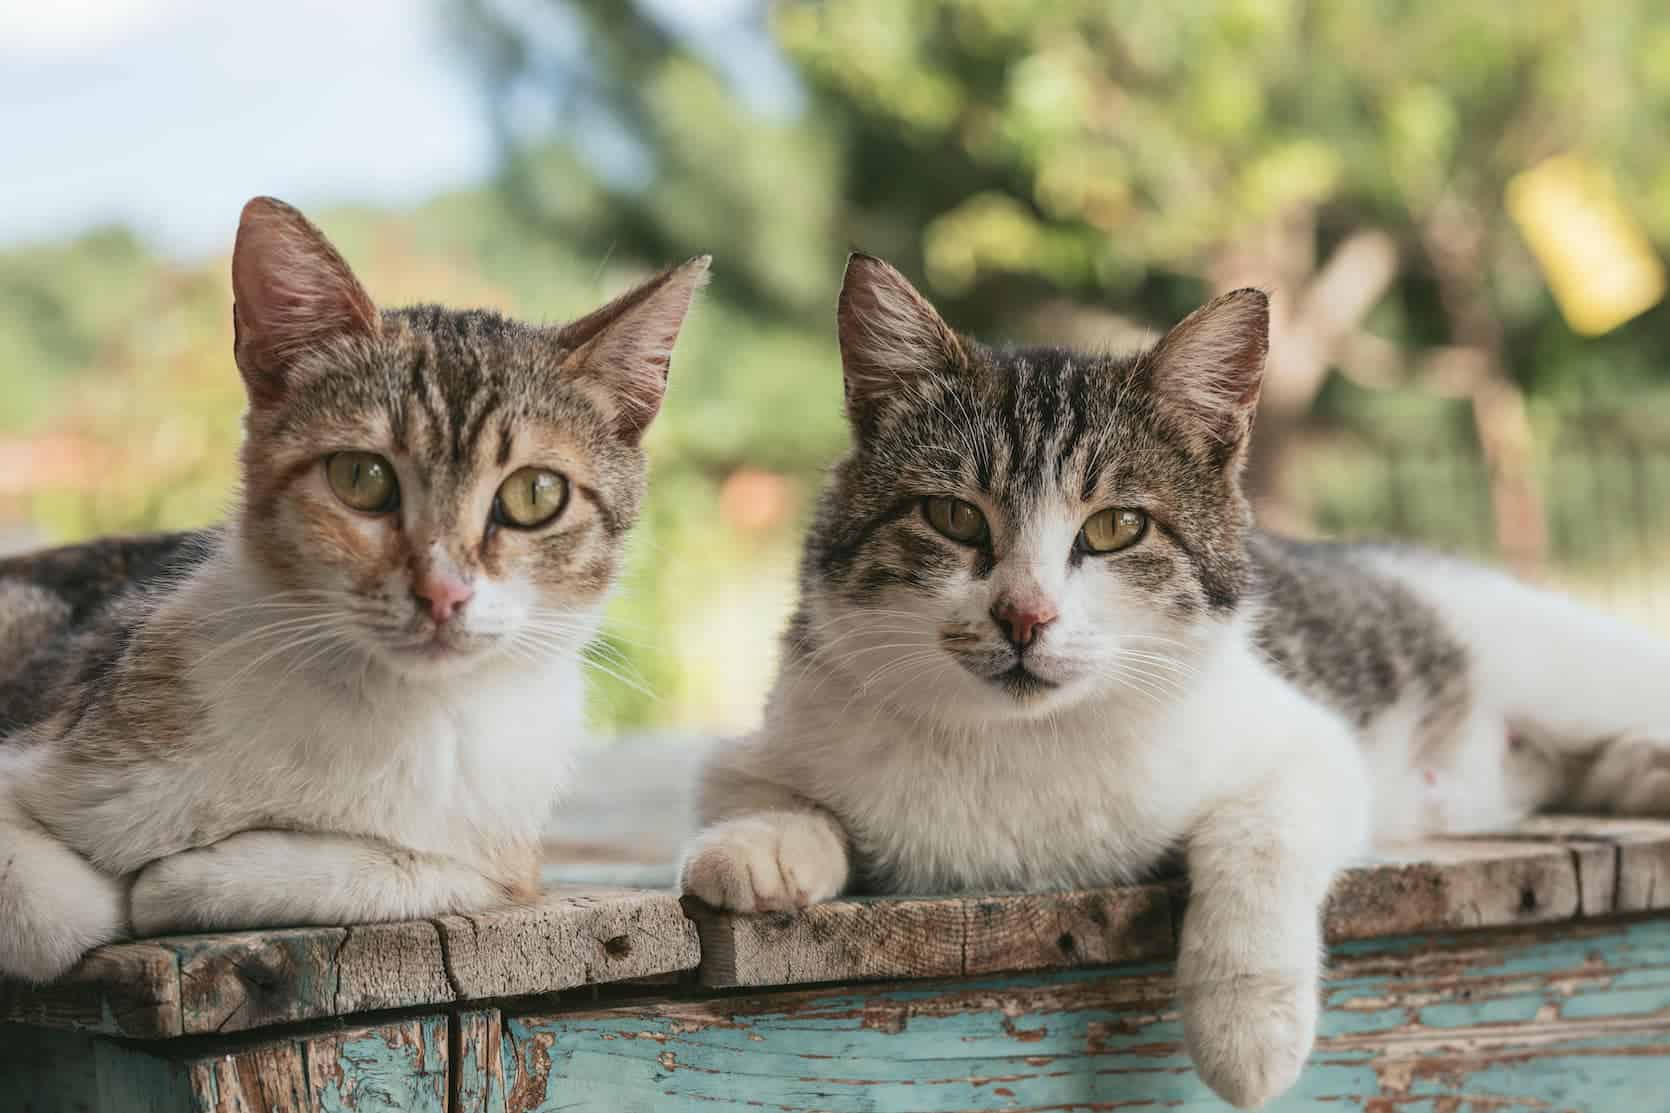 Two cats hanging out outside on a wooden table